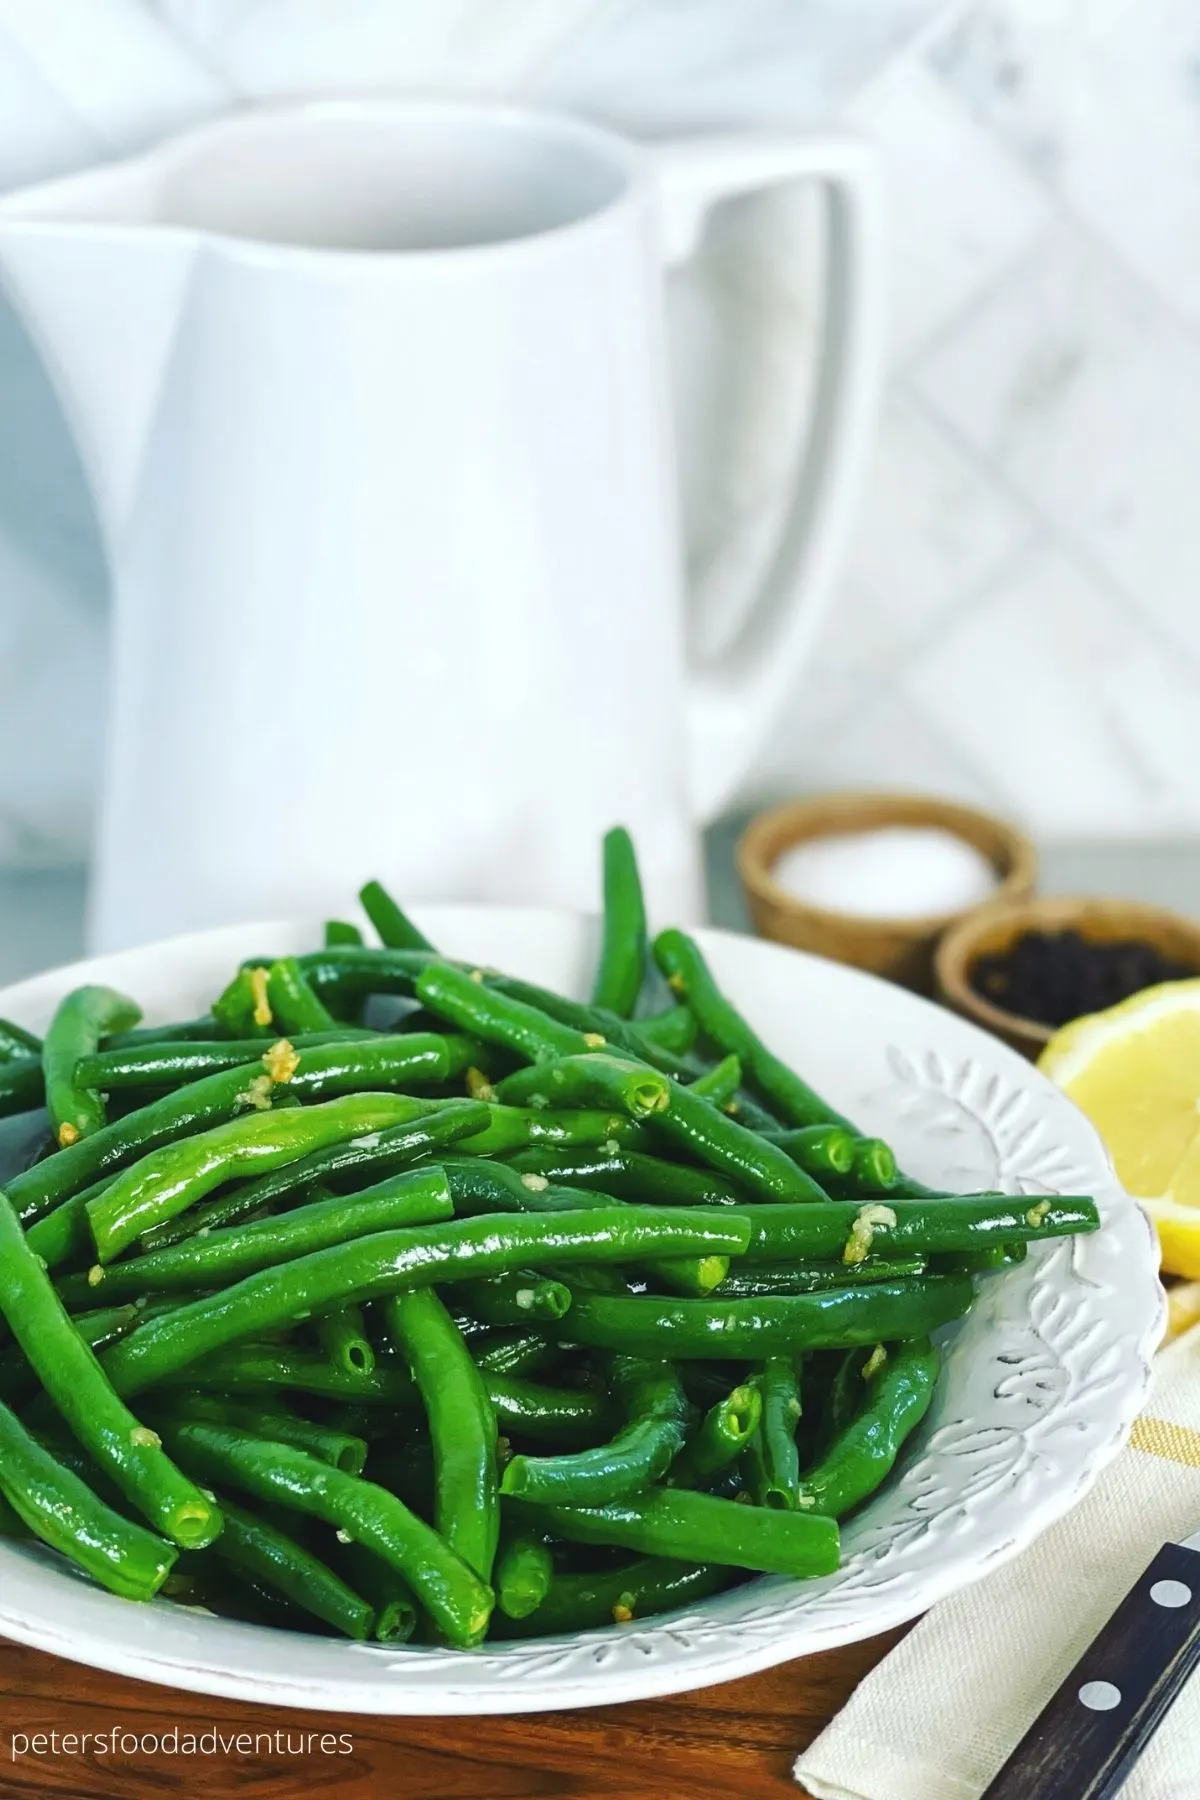 A close up of green beans with serving dishes in the background.